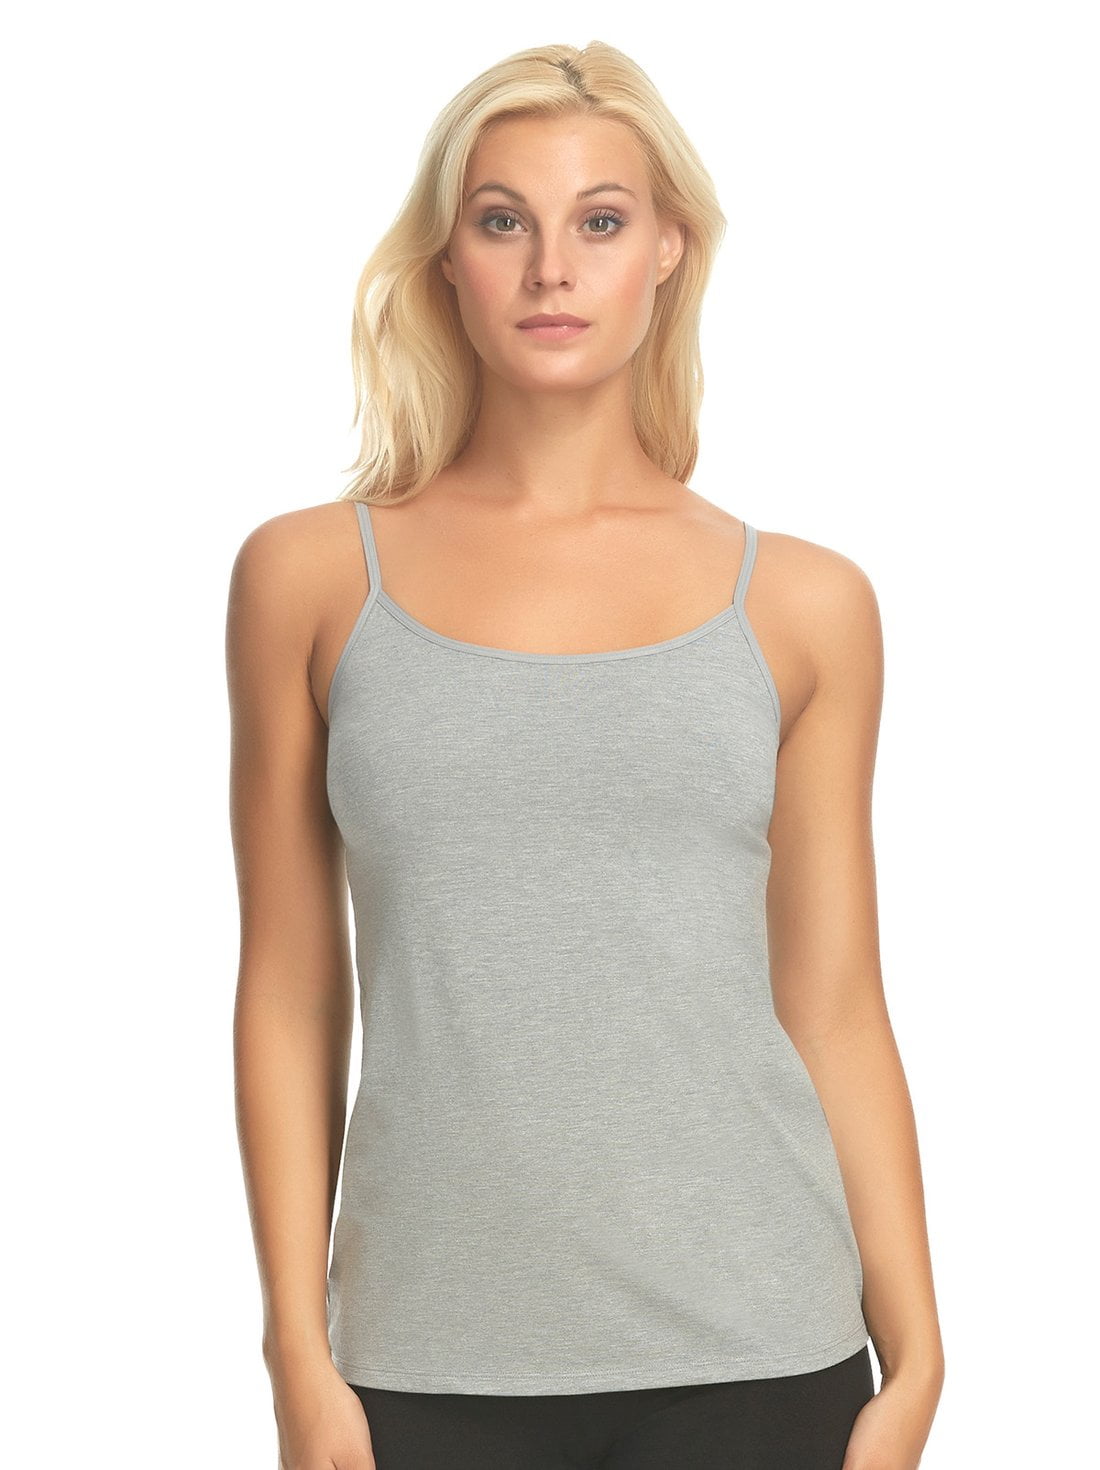 Felina Cotton Stretch Camisole Pink Style C2896R Scoop Neck